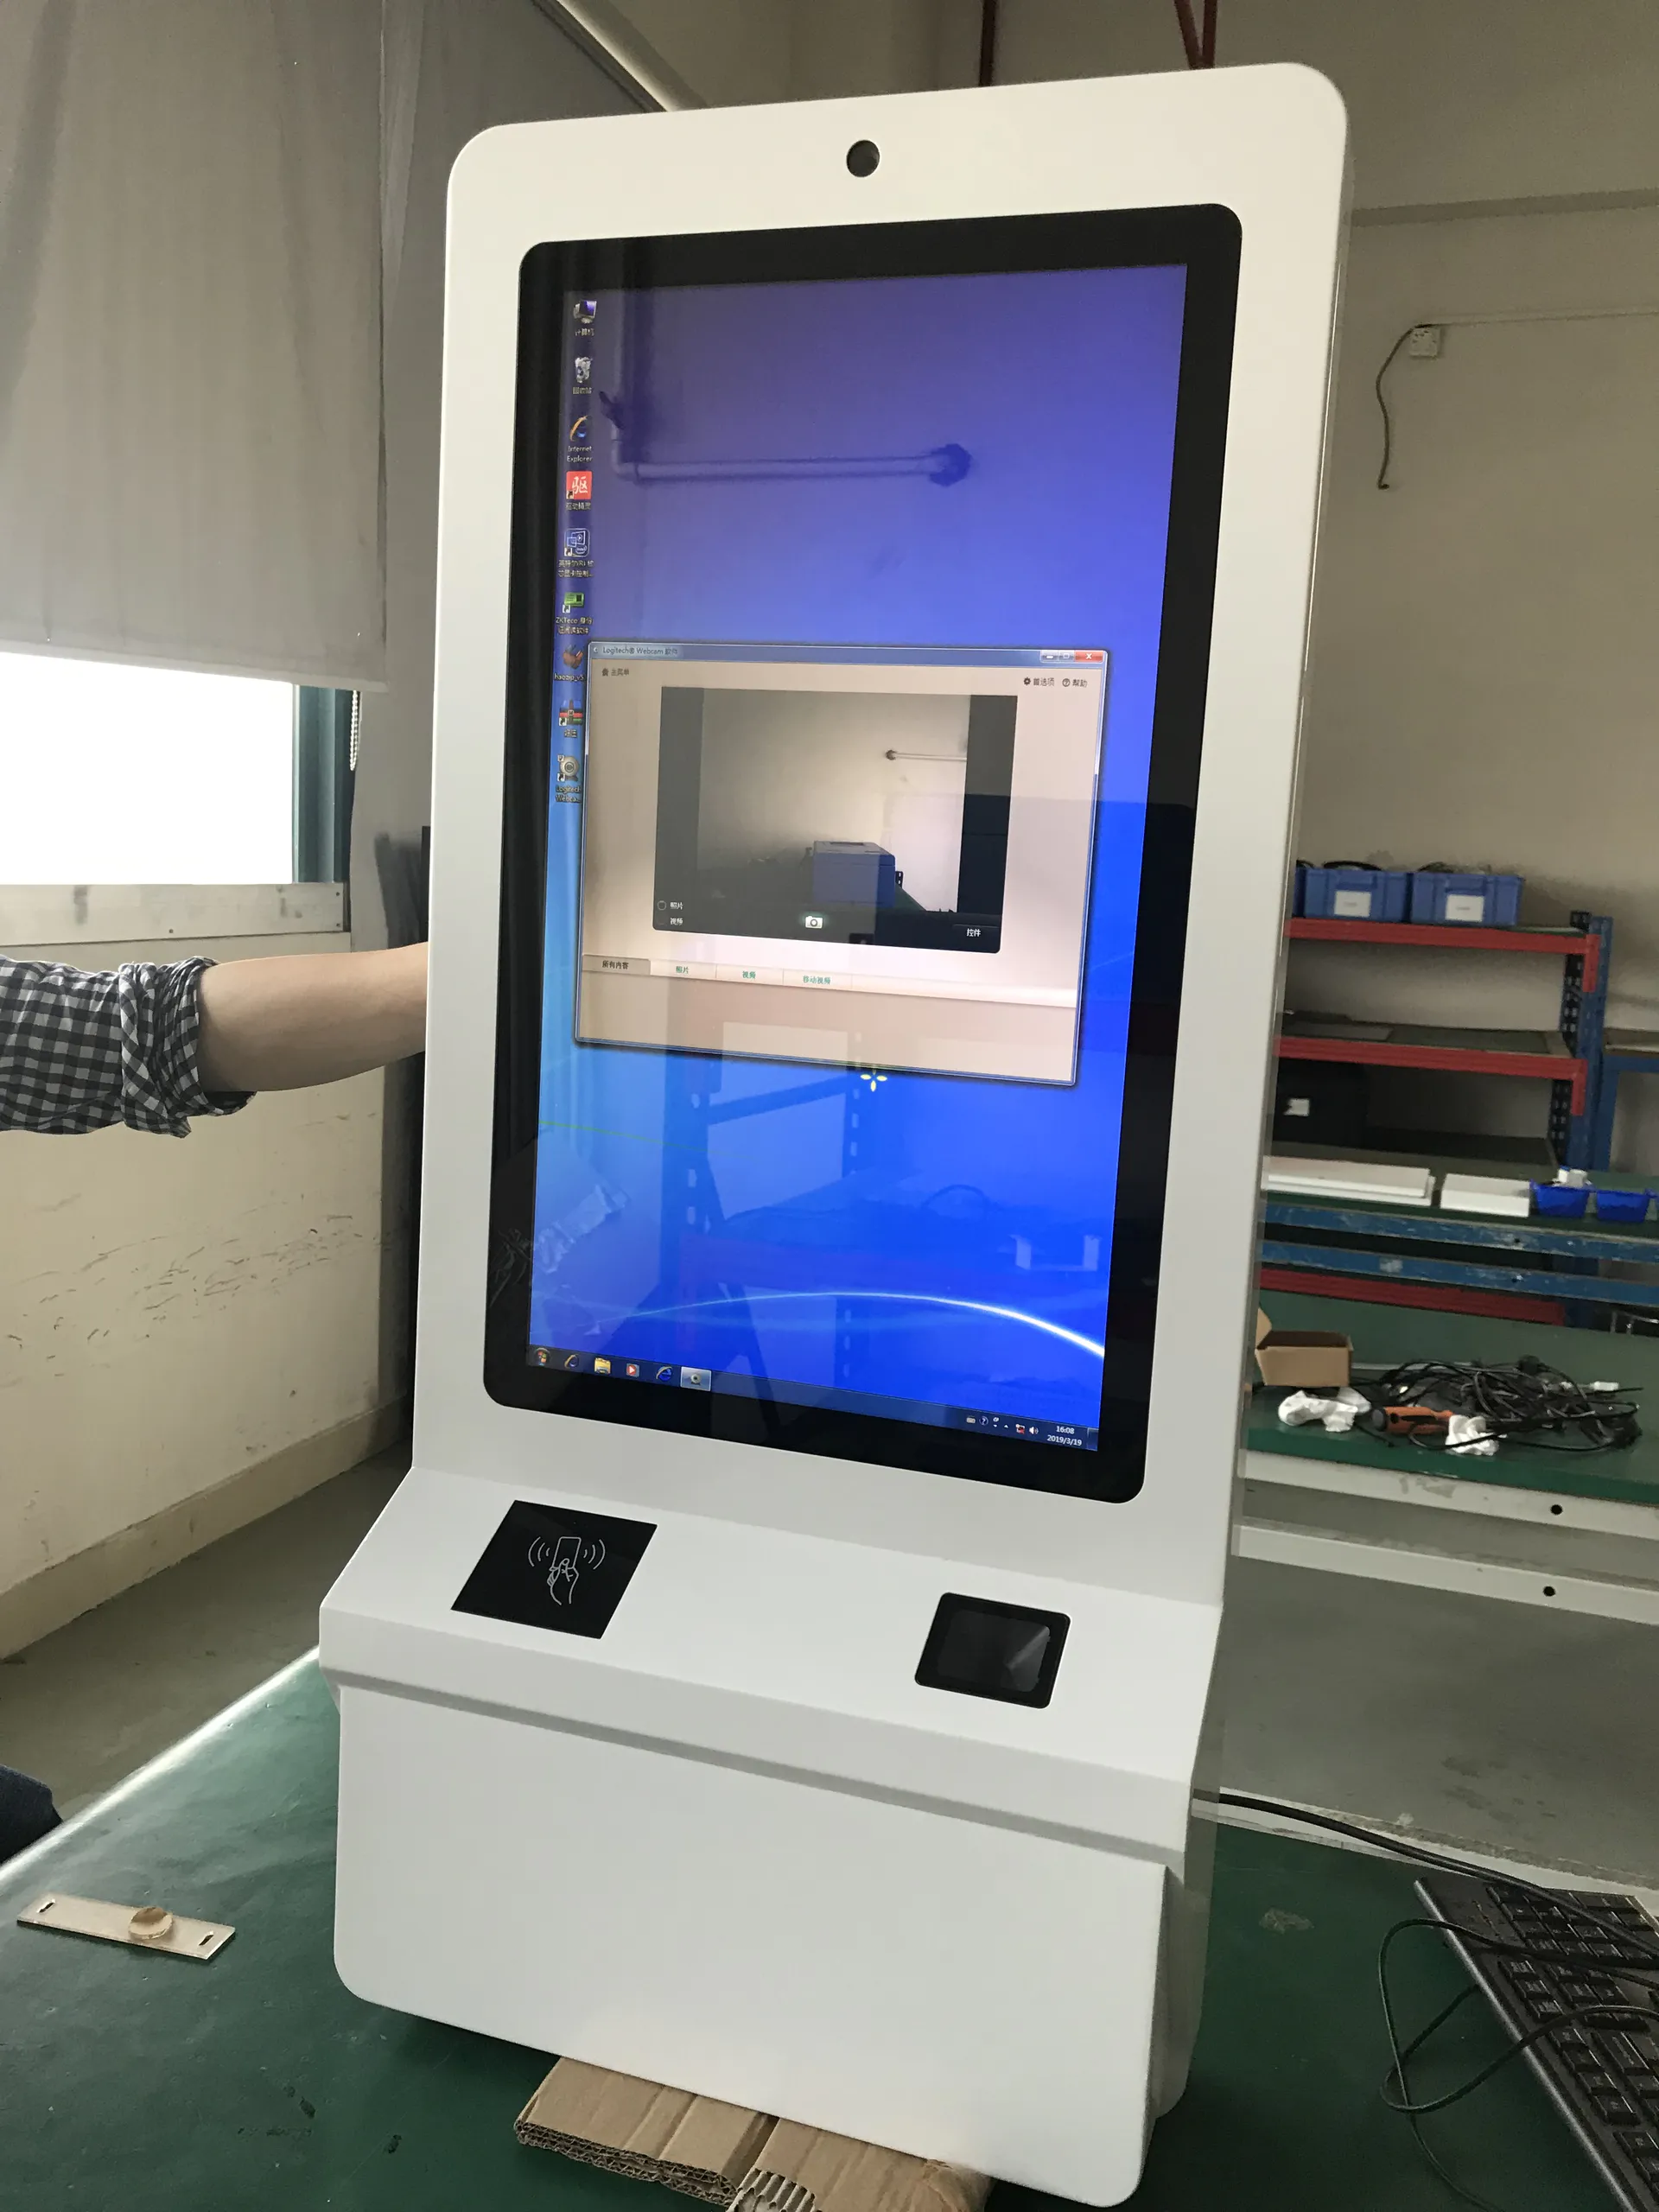 21.5inch touch screen wall mounted self ordering kiosk in restaurant